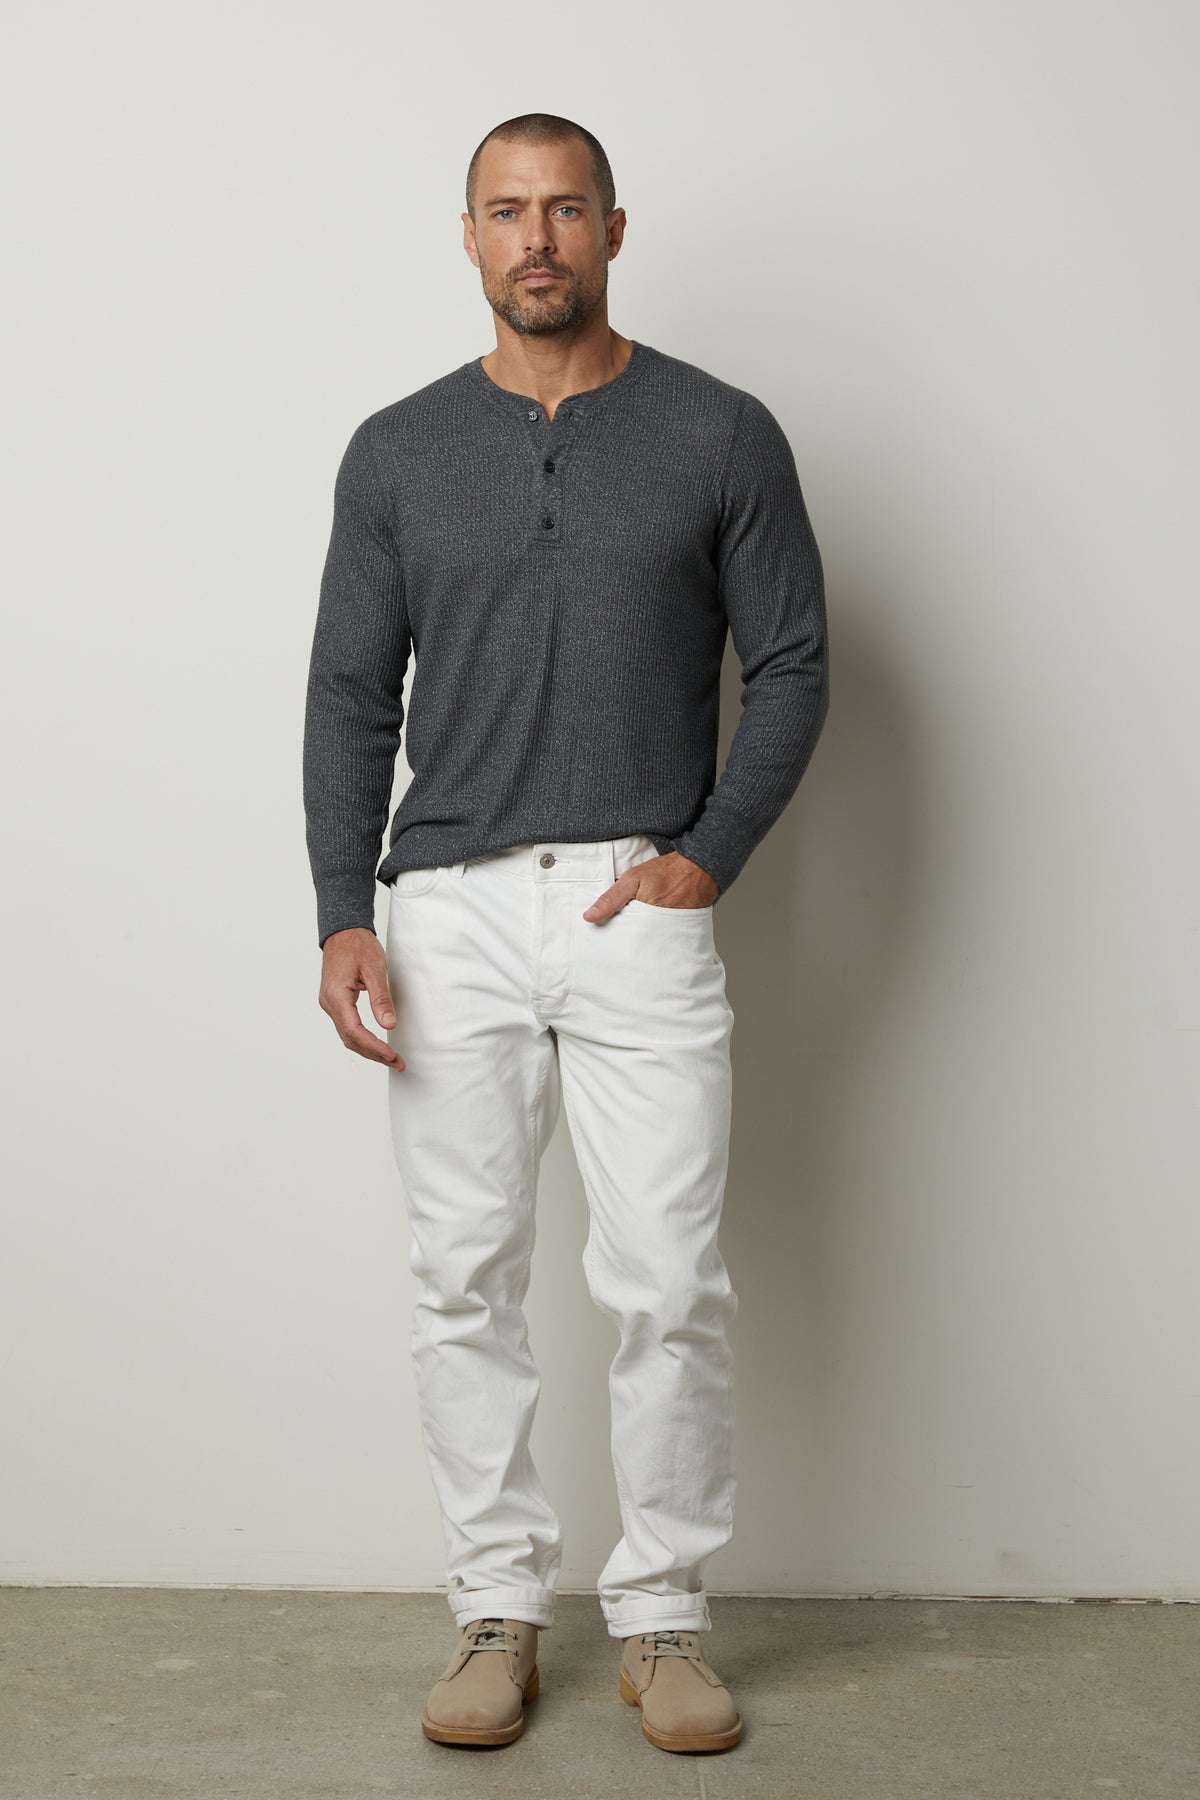 A man wearing a grey sweater with an ANTHONY THERMAL HENLEY by Velvet by Graham & Spencer and white pants.-35547473871041